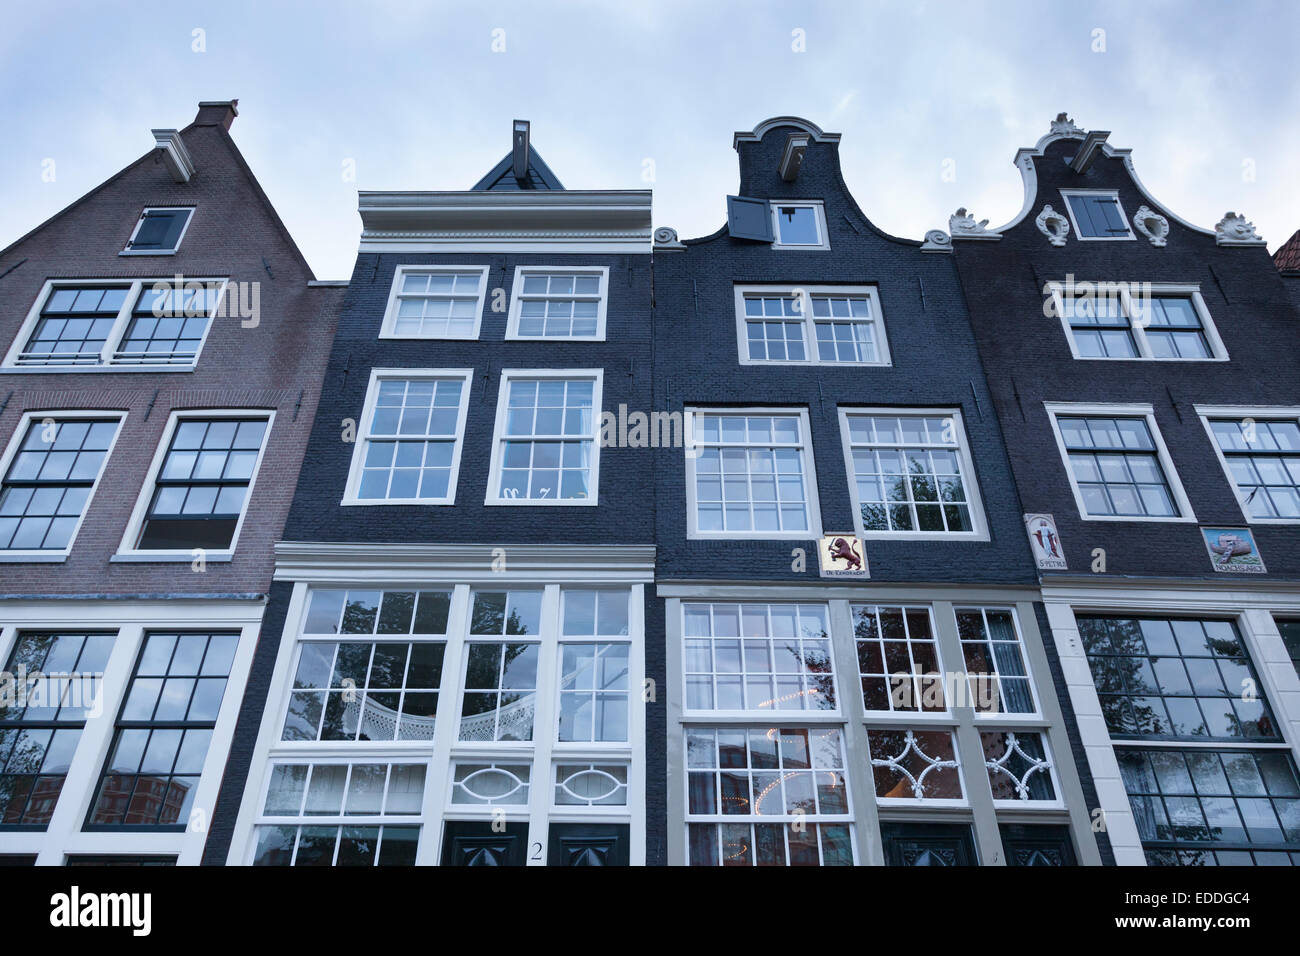 Netherlands, Amsterdam, four facades with divided light windows of residential houses Stock Photo